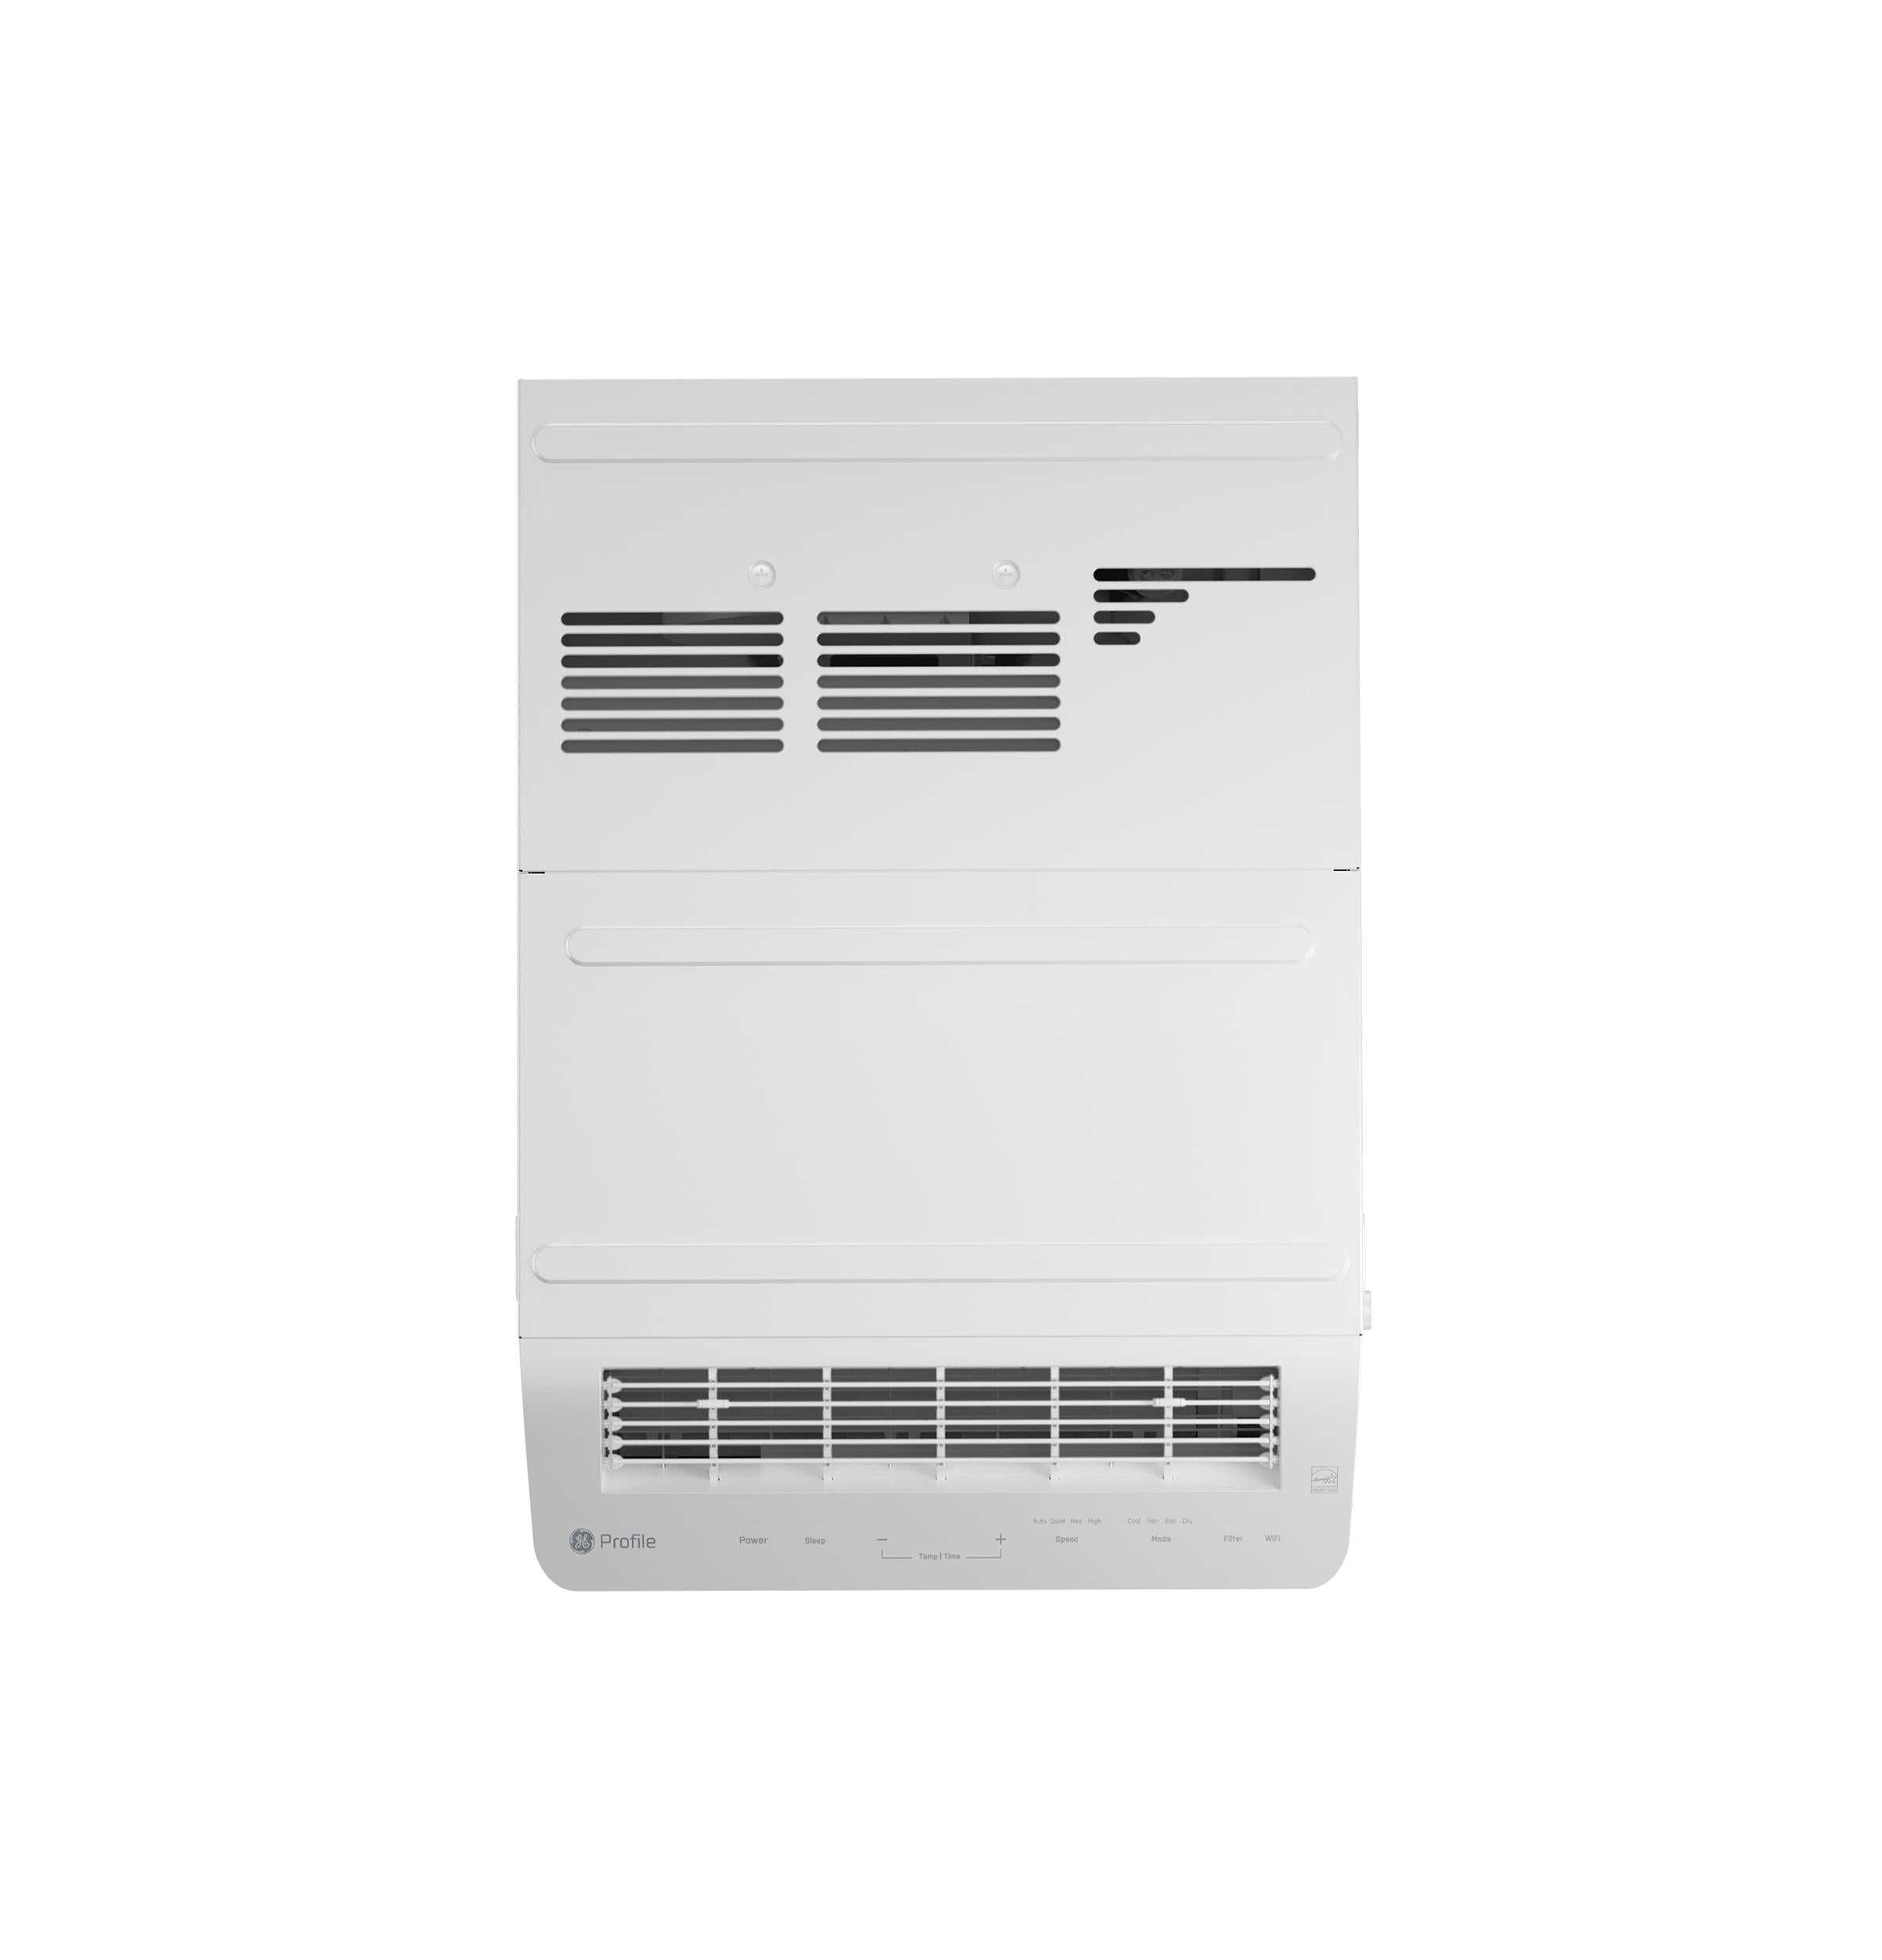 GE Profile ClearView™ 8,300 BTU Smart Ultra Quiet Window Air Conditioner for Medium Rooms up to 350 sq. ft.